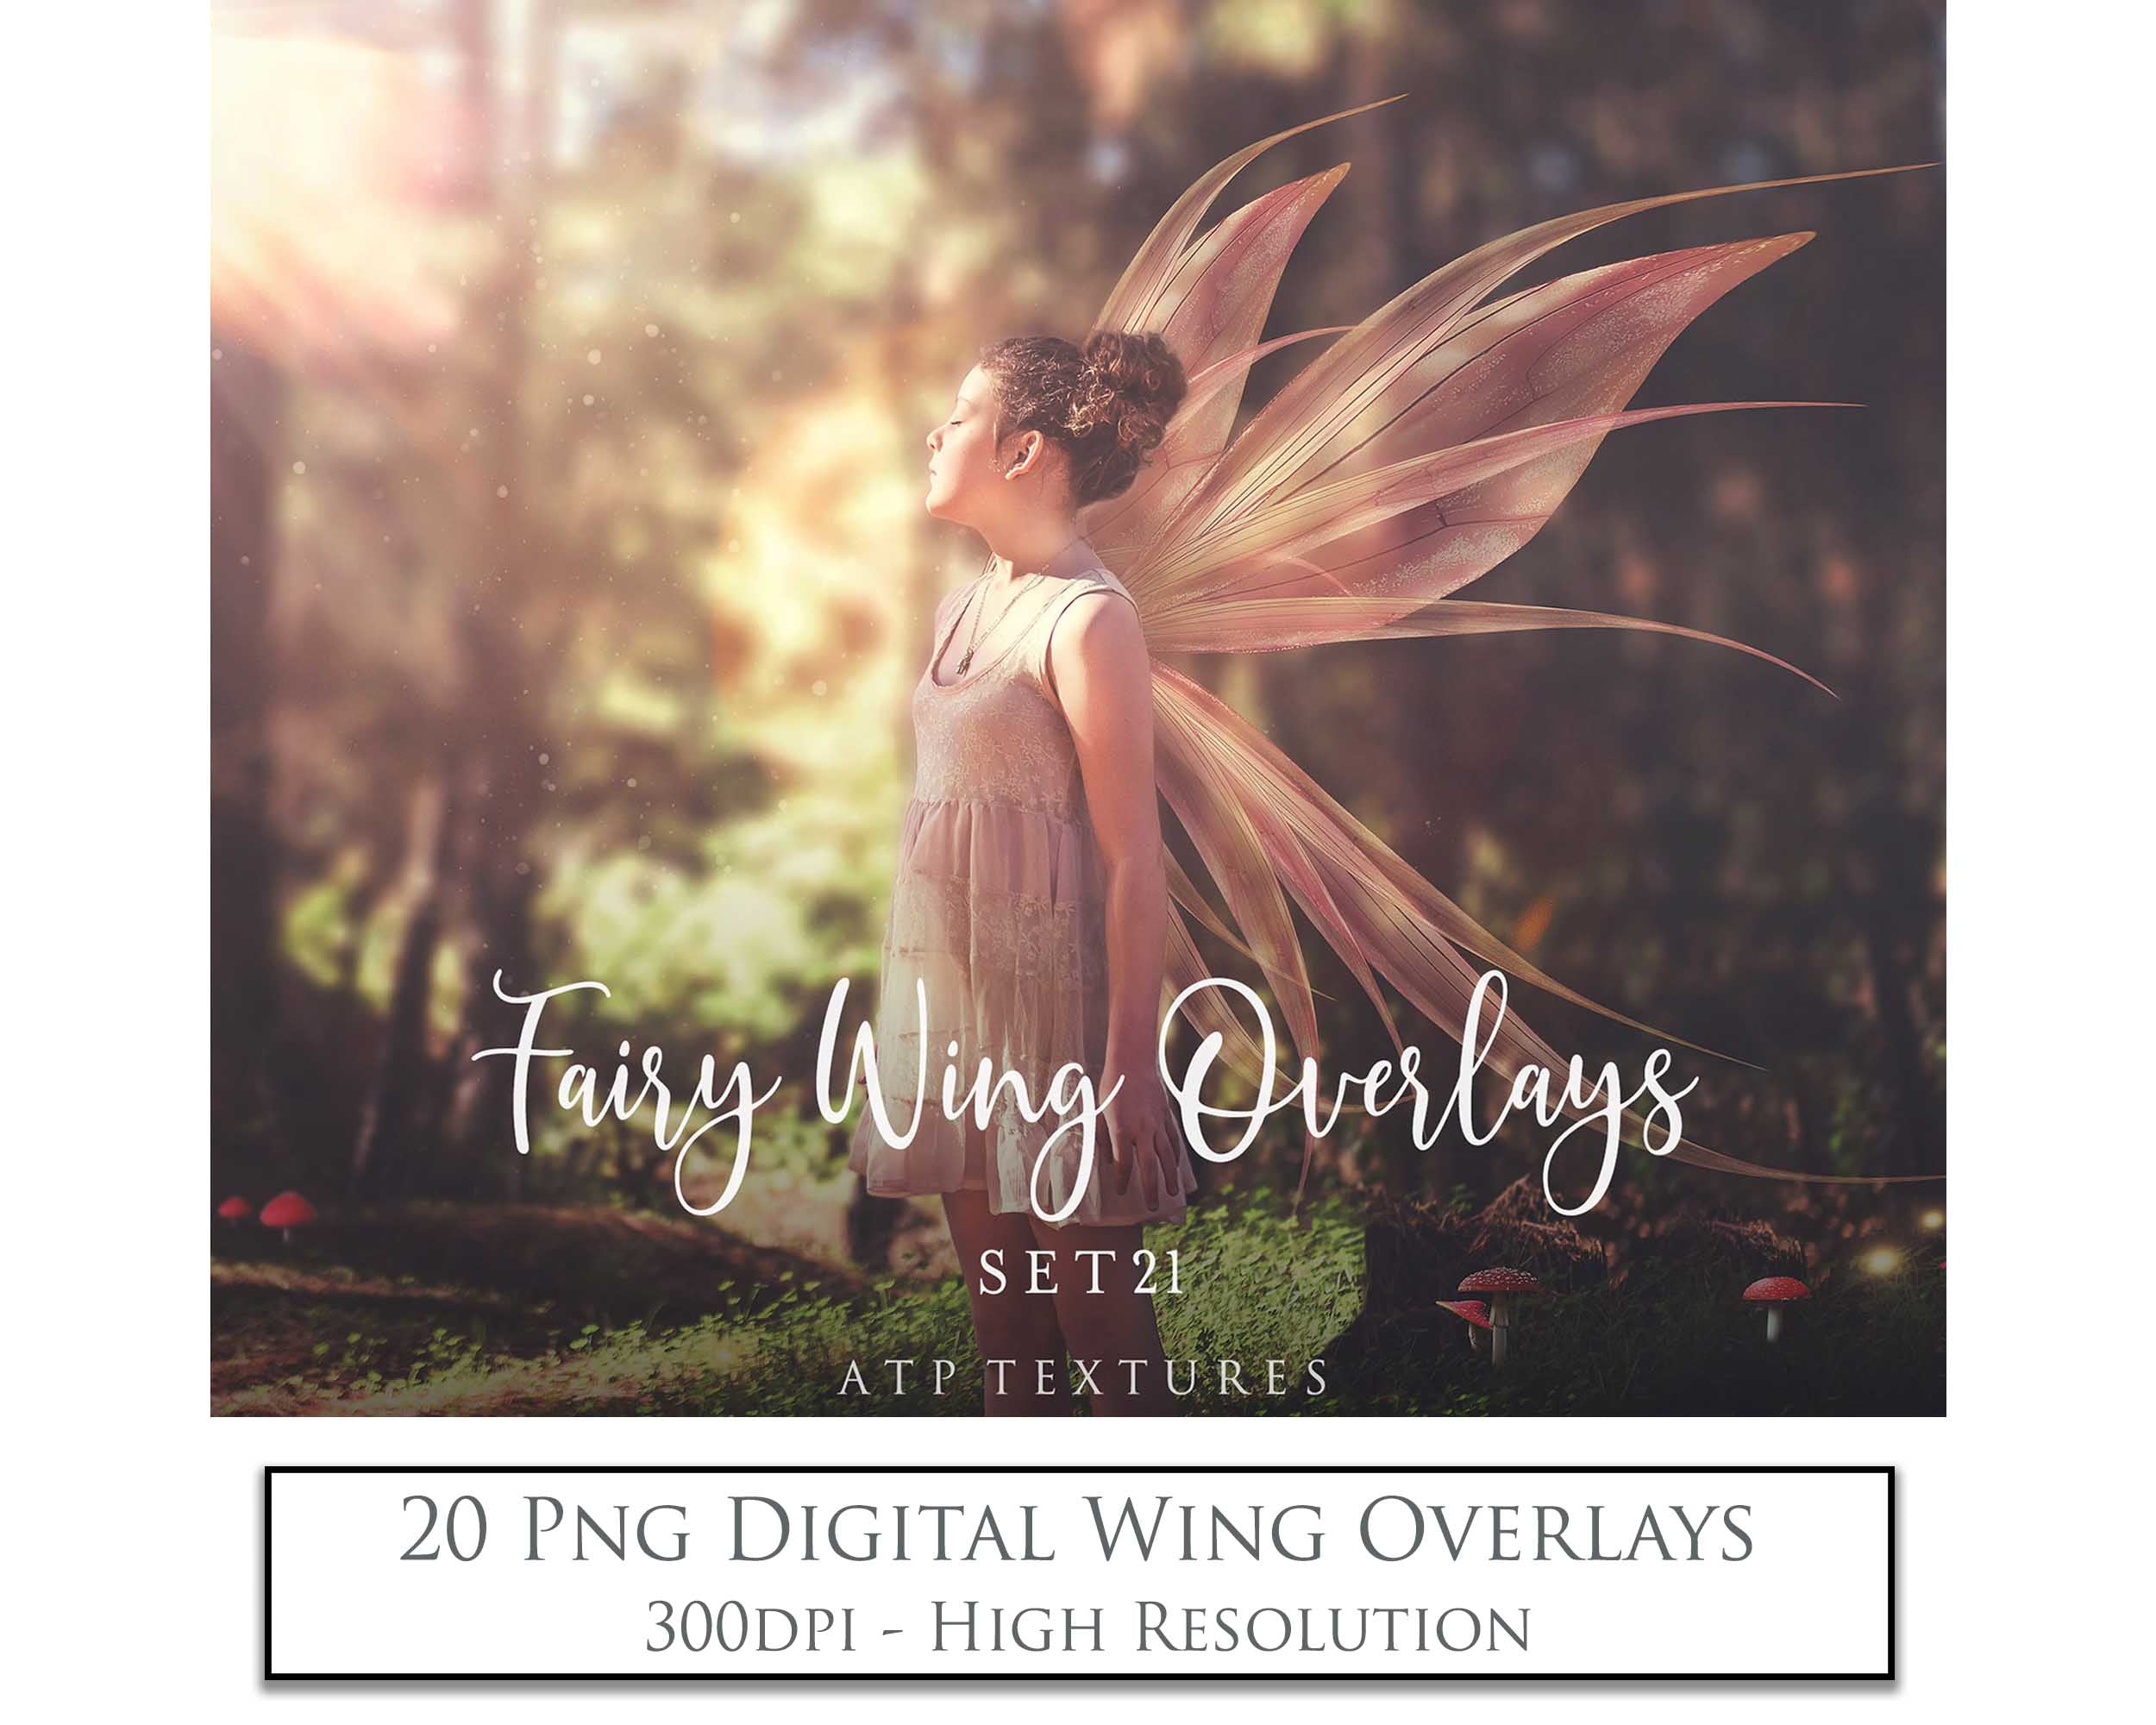 Digital Fairy Wing Overlays clipart. Png transparent see through files for photoshop. Butterfly Angel, Color, Print Photography editing. High resolution, 300dpi. Printable, Photography Graphic design assets, add on stock resources. Magical Scrapbooking design. Faery Photographer edit. Colorful Big Bundle. ATP Textures.